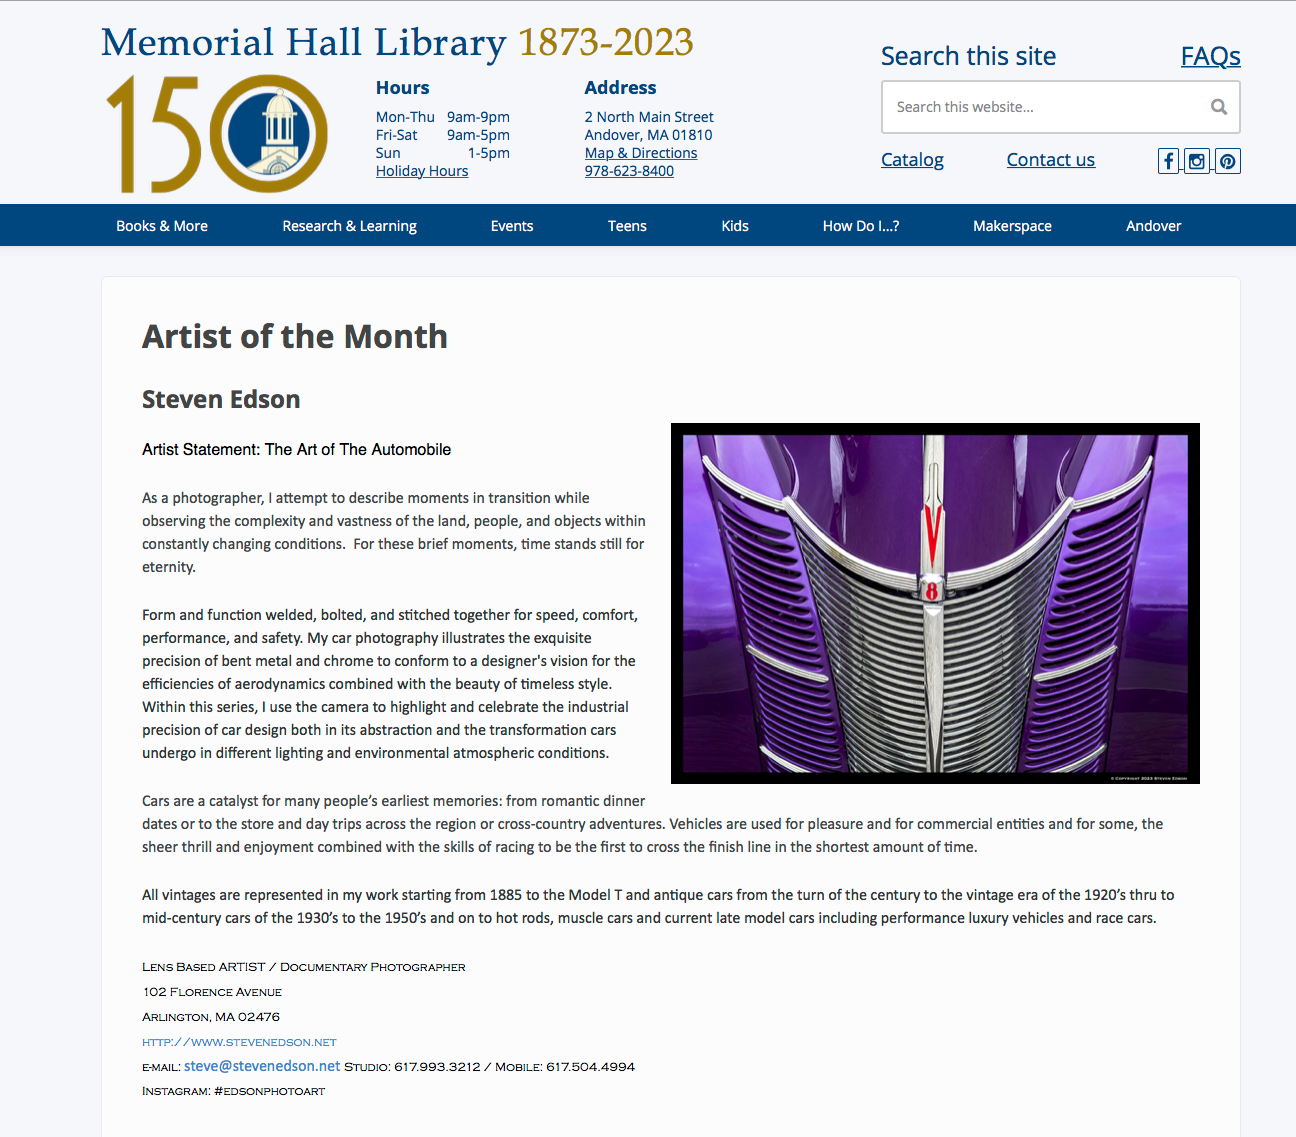 The Art of the Automobile show at Memorial Hall Library